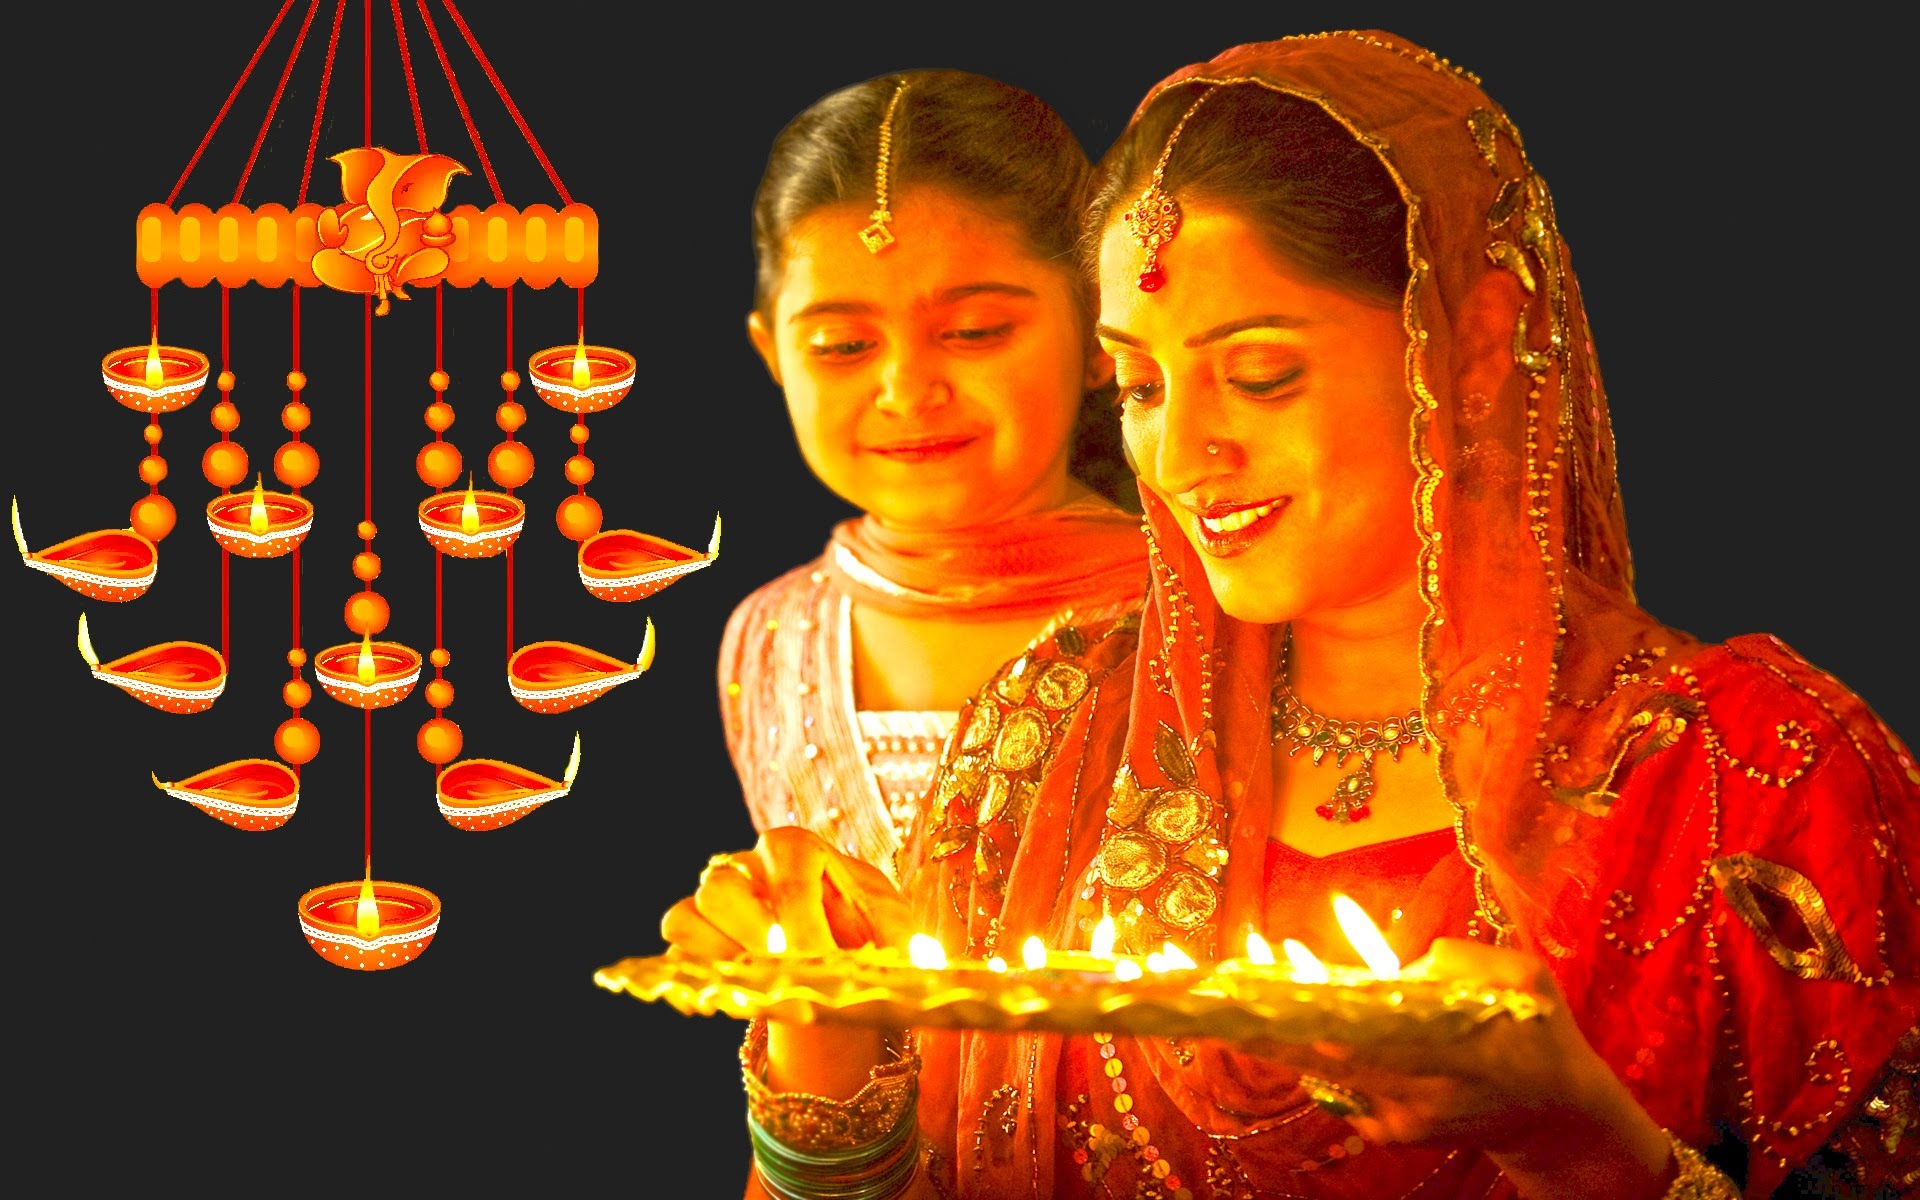 Happy Diwali Celebration Indian Woman Culture And Tradition Greeting ...